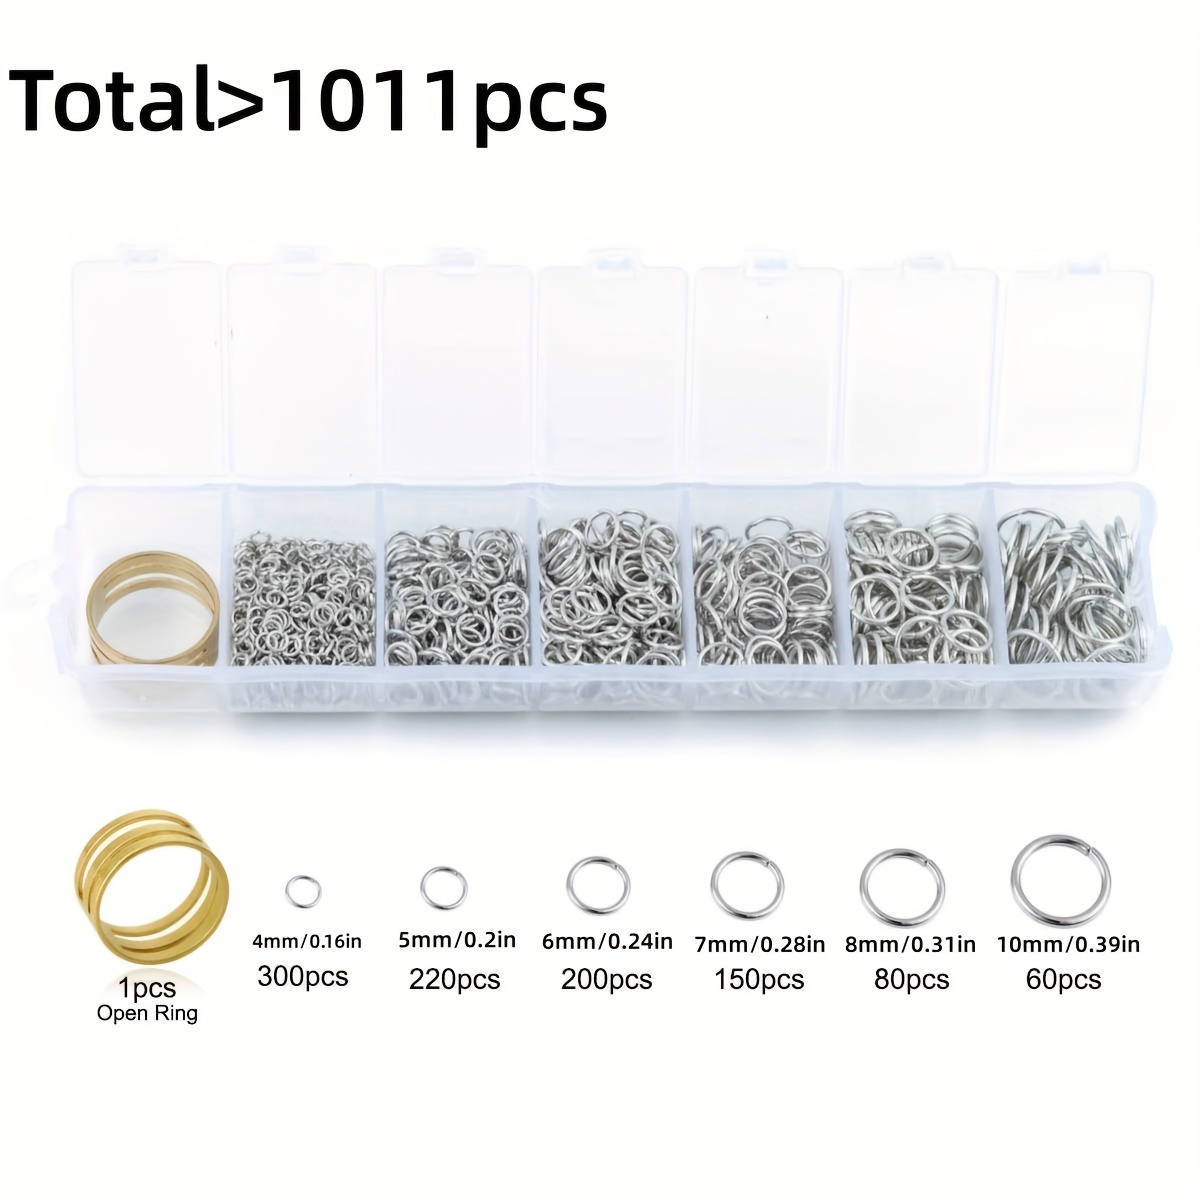  1500Pcs Mixed 6 Sizes Open Jump Rings,4mm 5mm 6mm 7mm